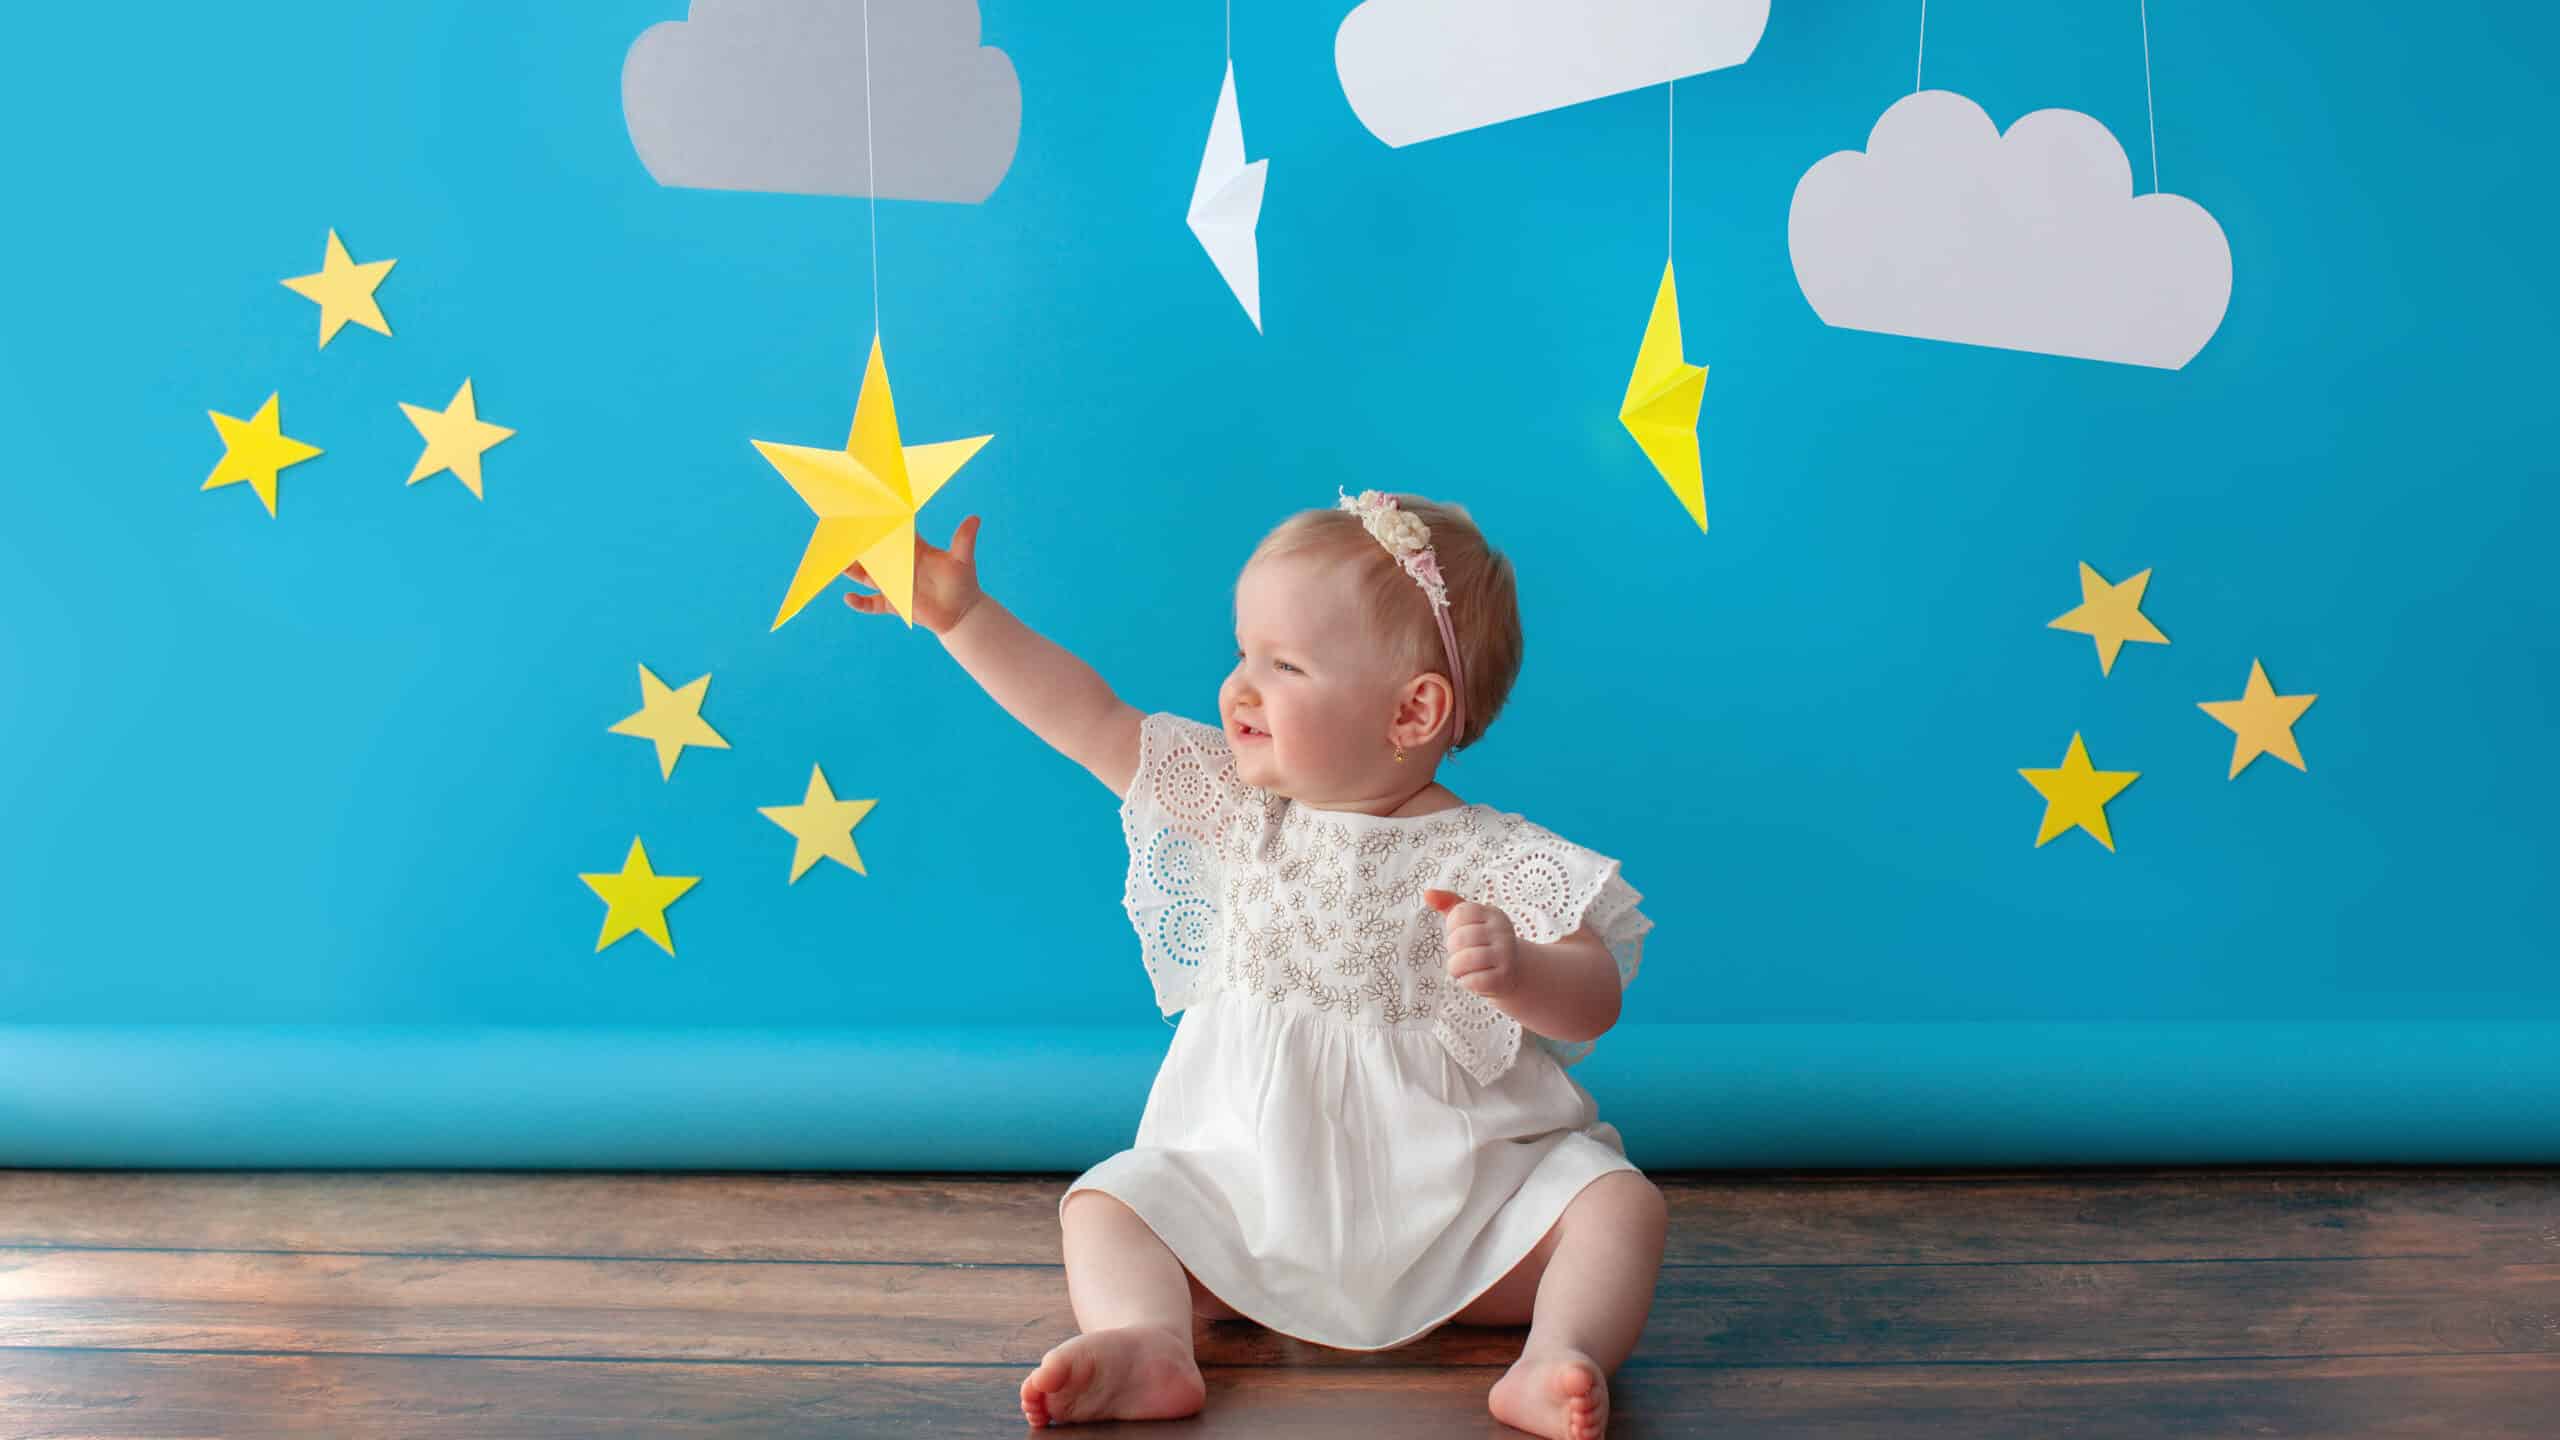 One year old baby celebrates birthday. Photo zone. Cute dress in white color. She touches a paper yellow star.